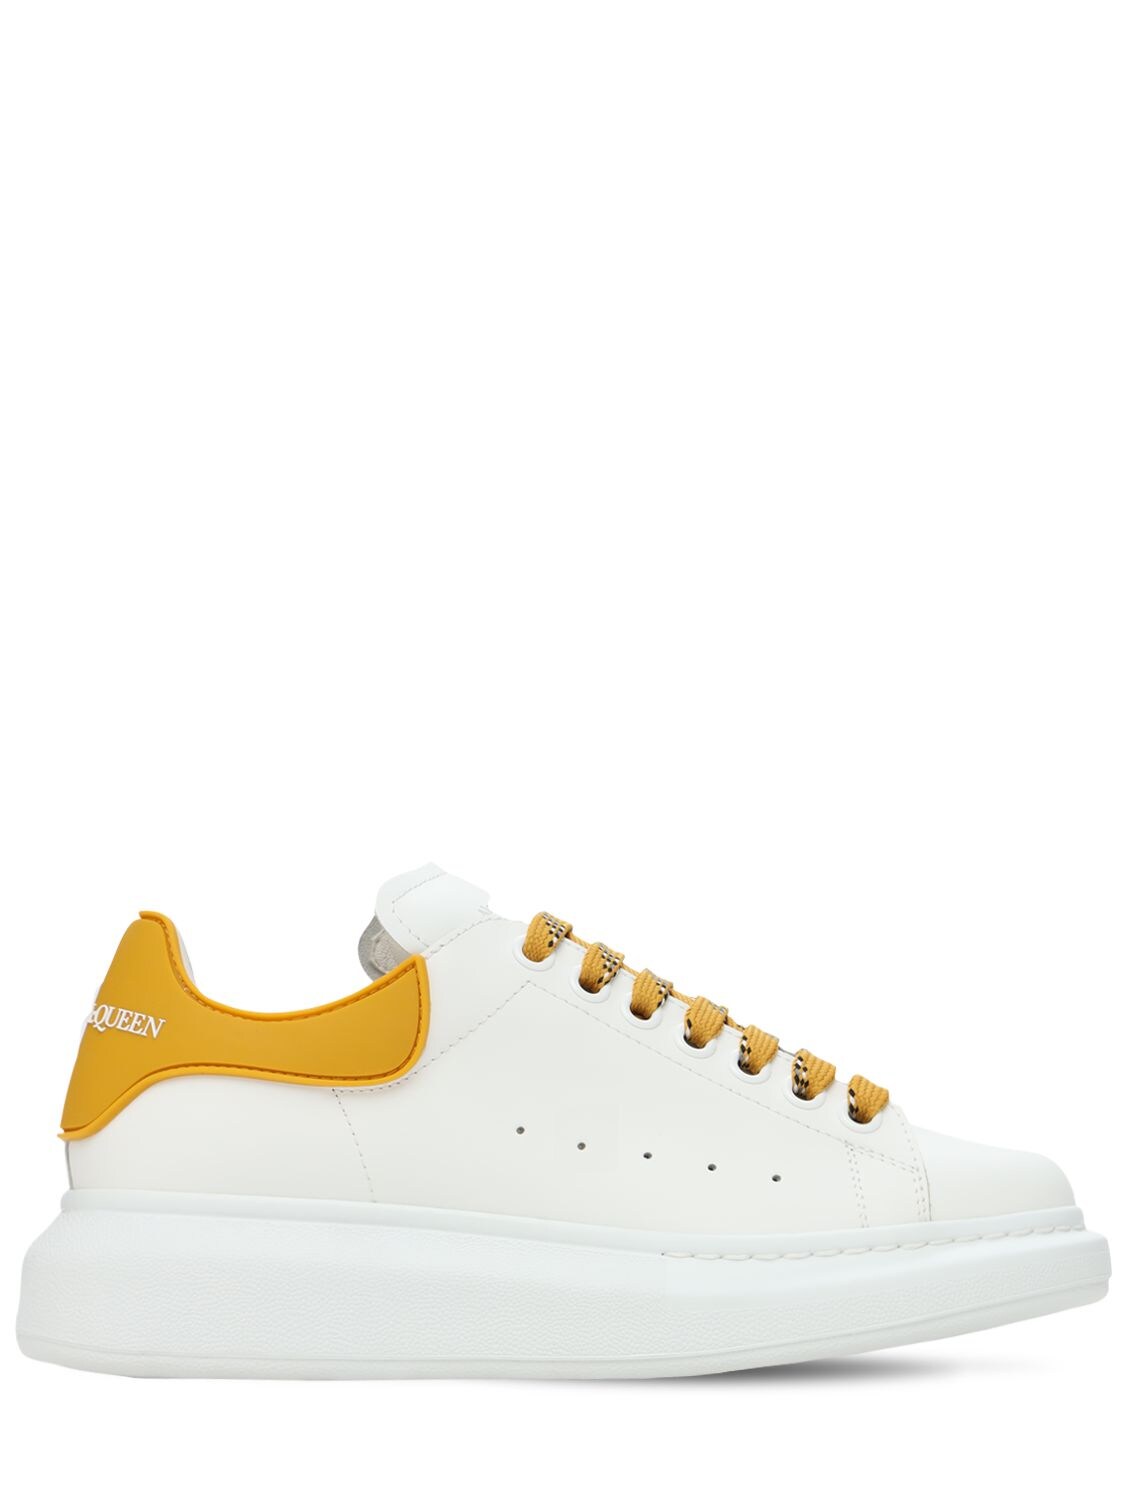 Alexander Mcqueen 45mm Leather & Pvc Sneakers In White,yellow